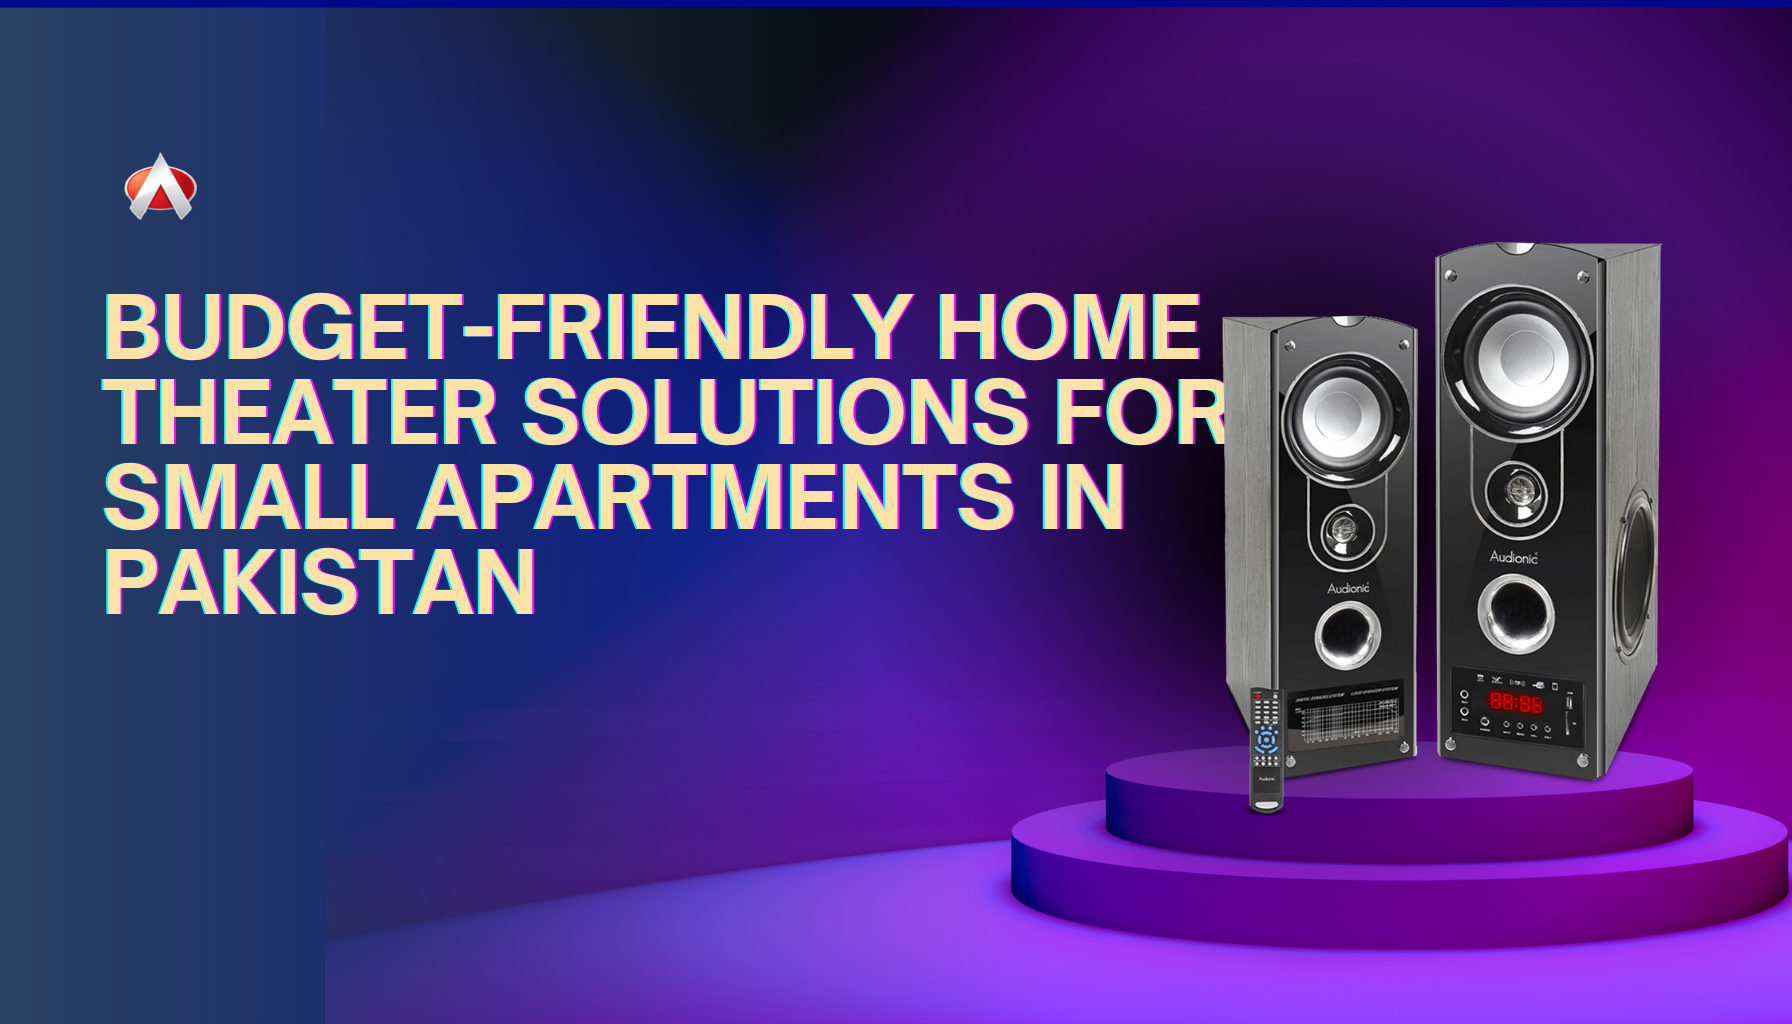 Budget-Friendly Home Theater Solutions for Small Apartments in Pakistan